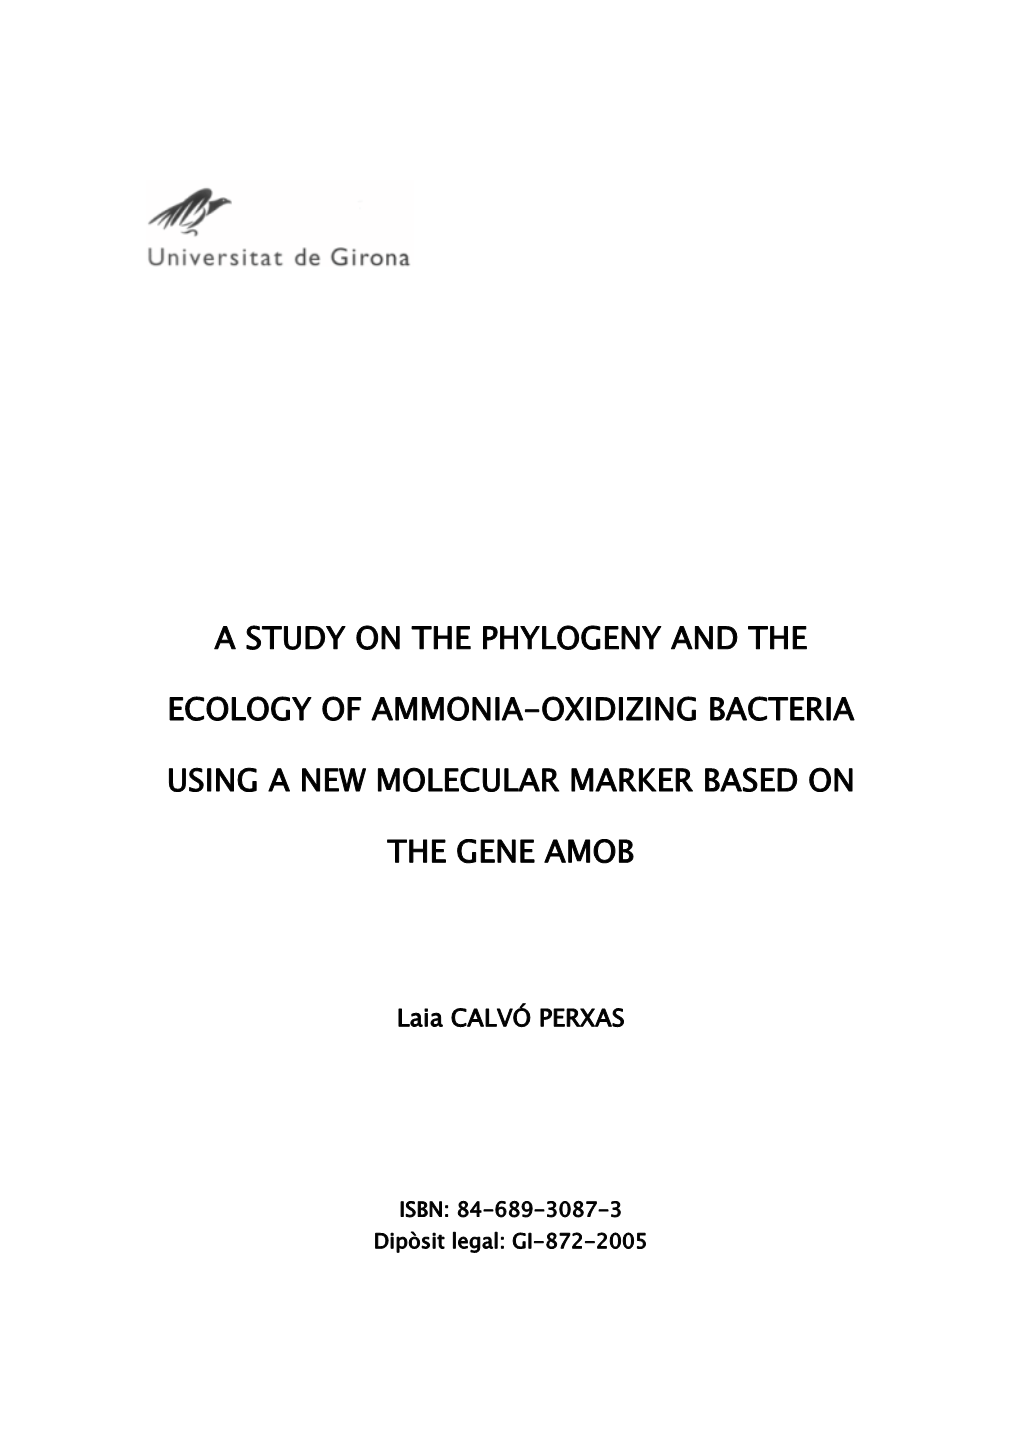 A Study on the Phylogeny and the Ecology of Ammonia Oxidizing Bacteria Using a New Molecular Marker Based on the Gene Amob